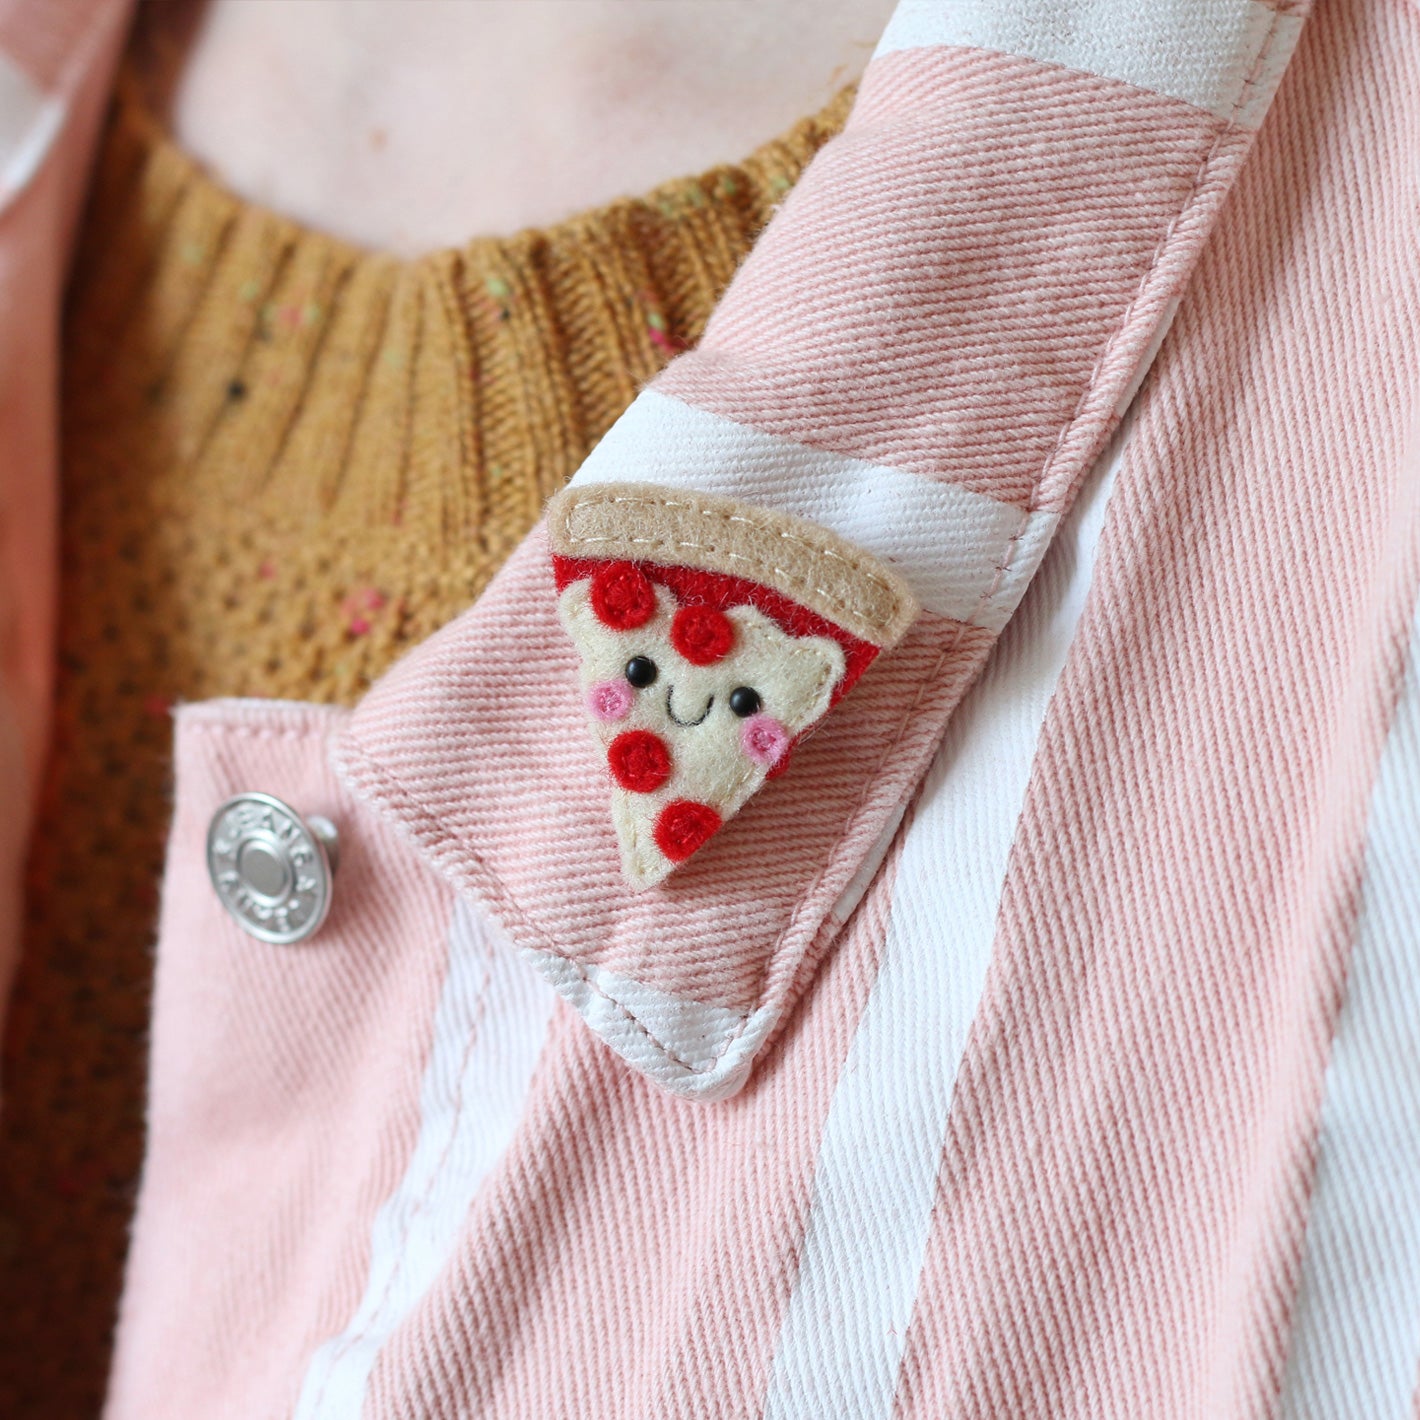 Pepperoni pizza felt brooch modelled on a pink and white striped denim jacket